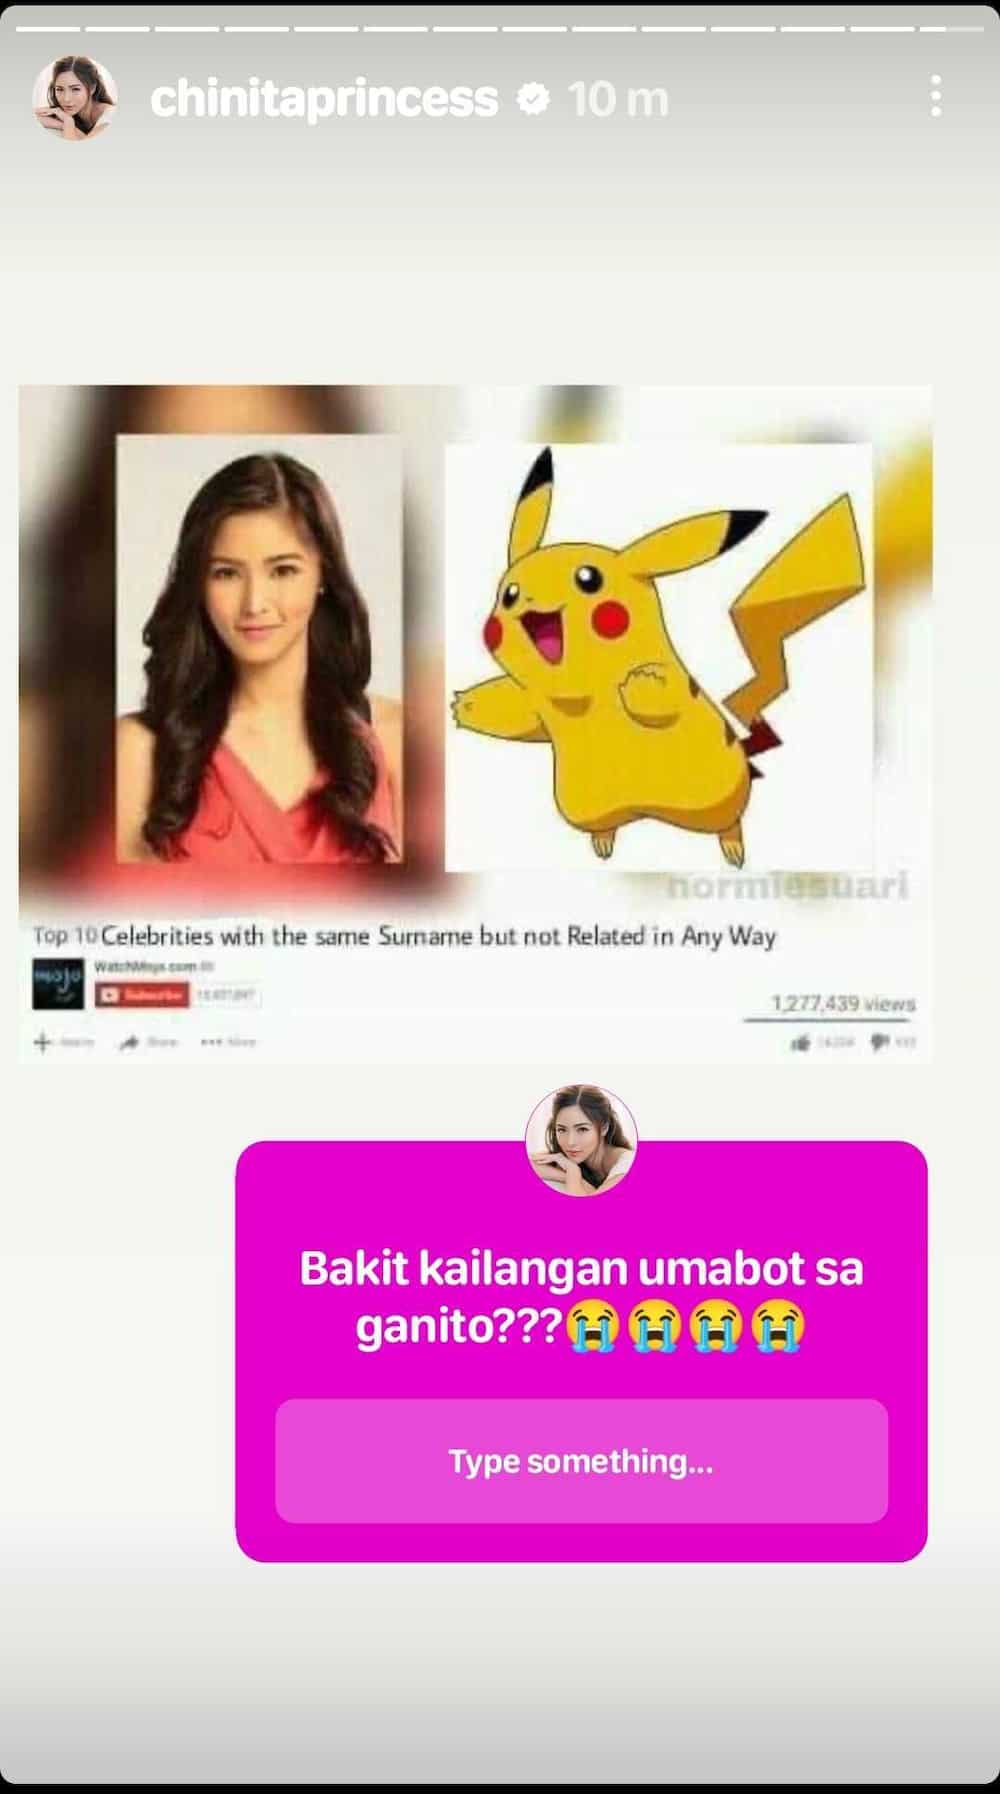 Kim Chiu hilariously reacts to funny post saying she and Pikachu share the same surname